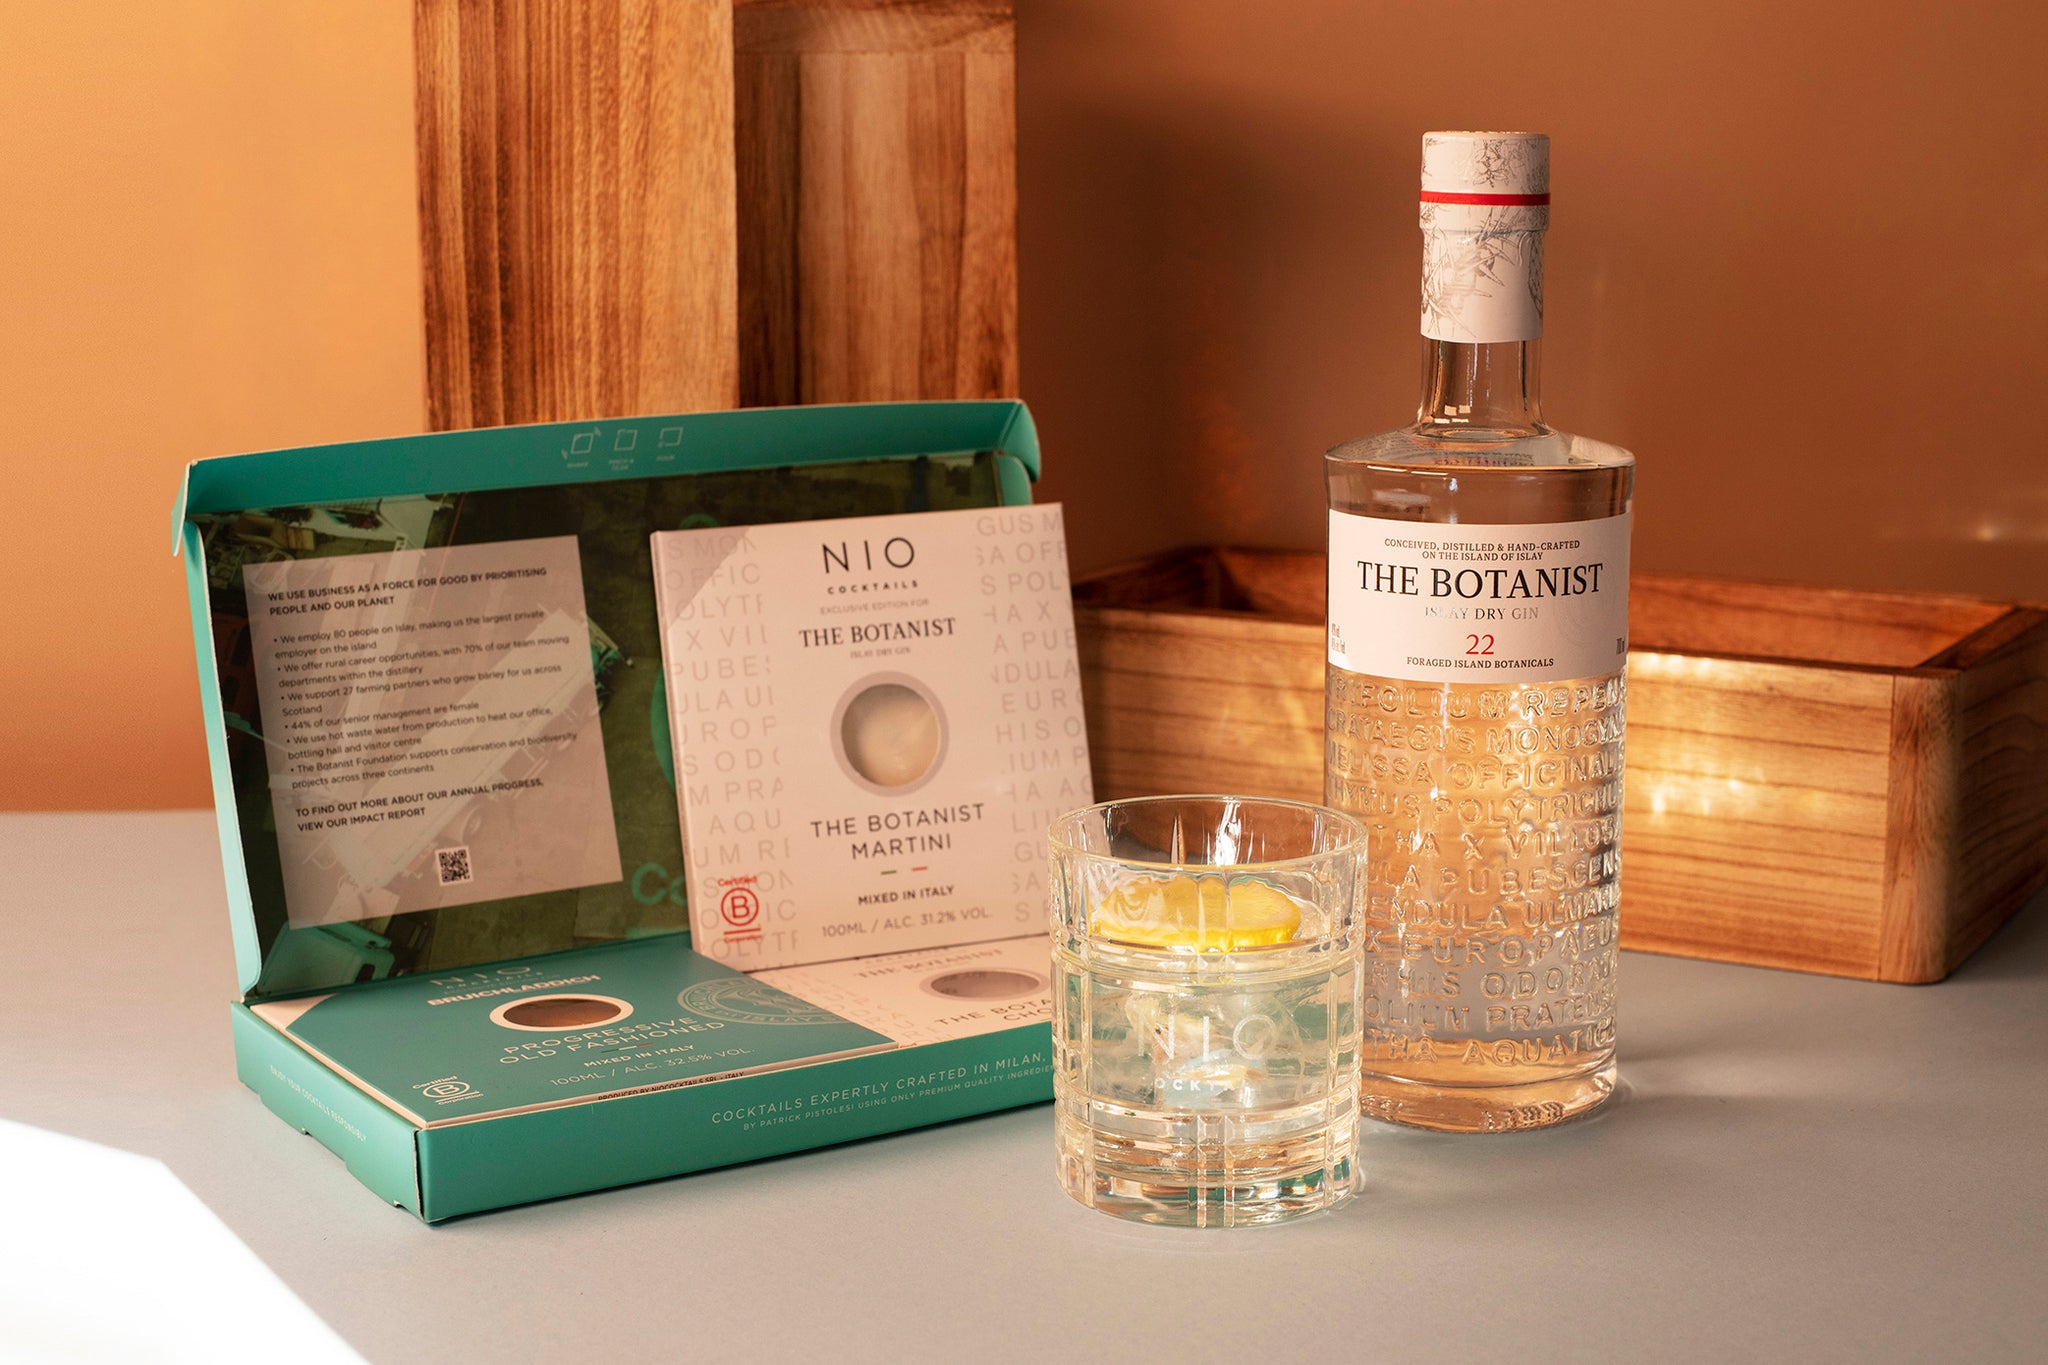 Bruichladdich and The Botanist Cocktail Box